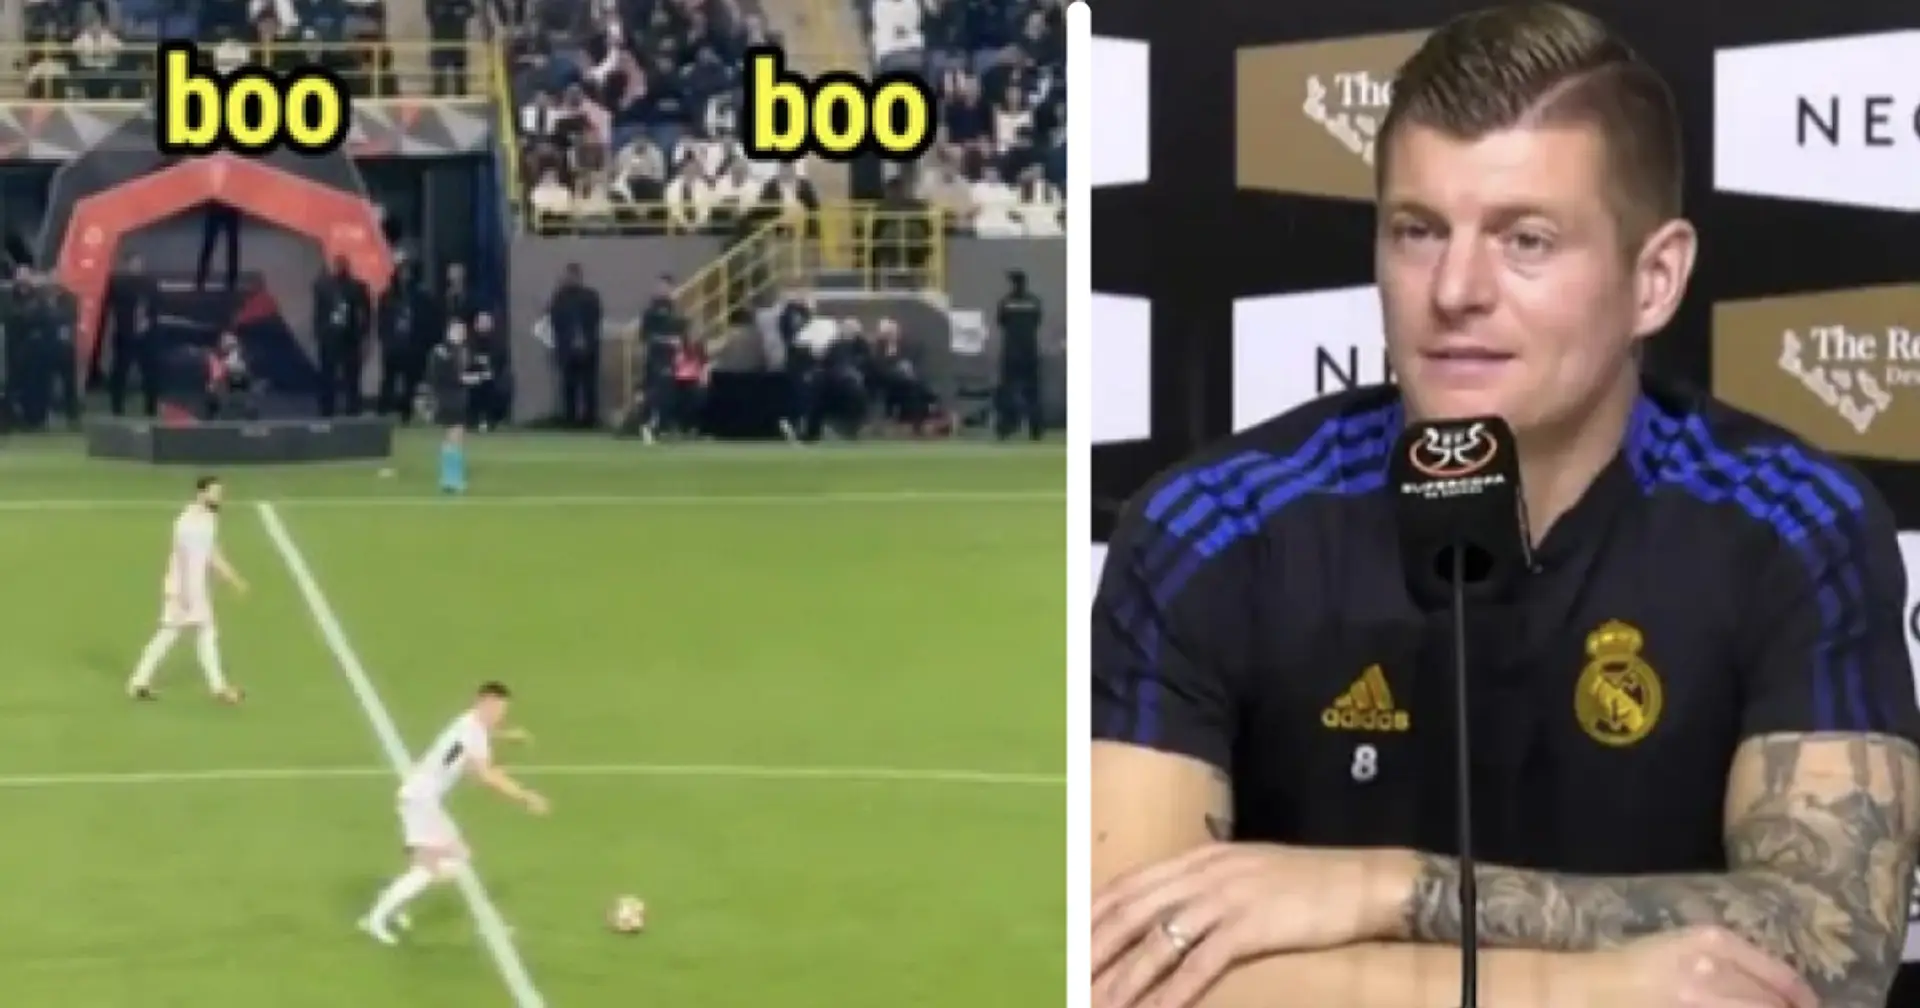 'I say it from the bottom of my heart': Toni Kroos reacts to Saudi crowd booing him during Supercopa